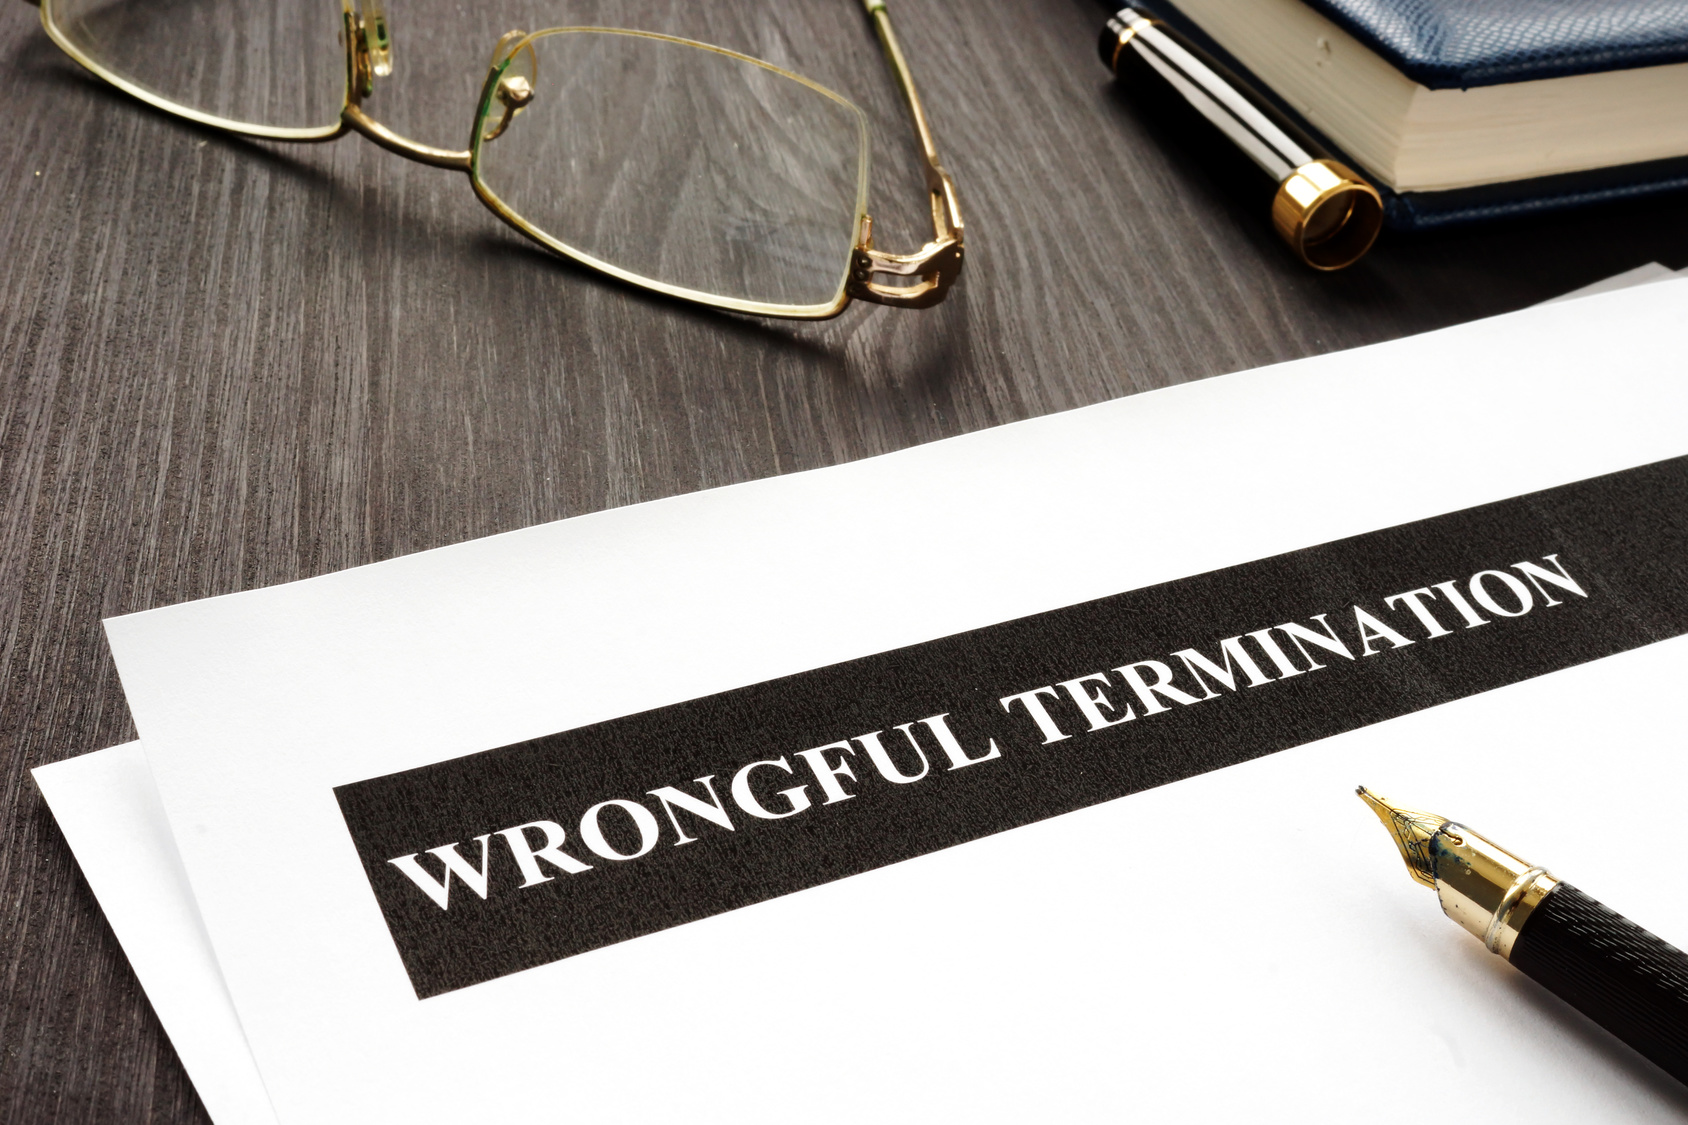 Wrongful Termination Attorneys - Why You Need Them